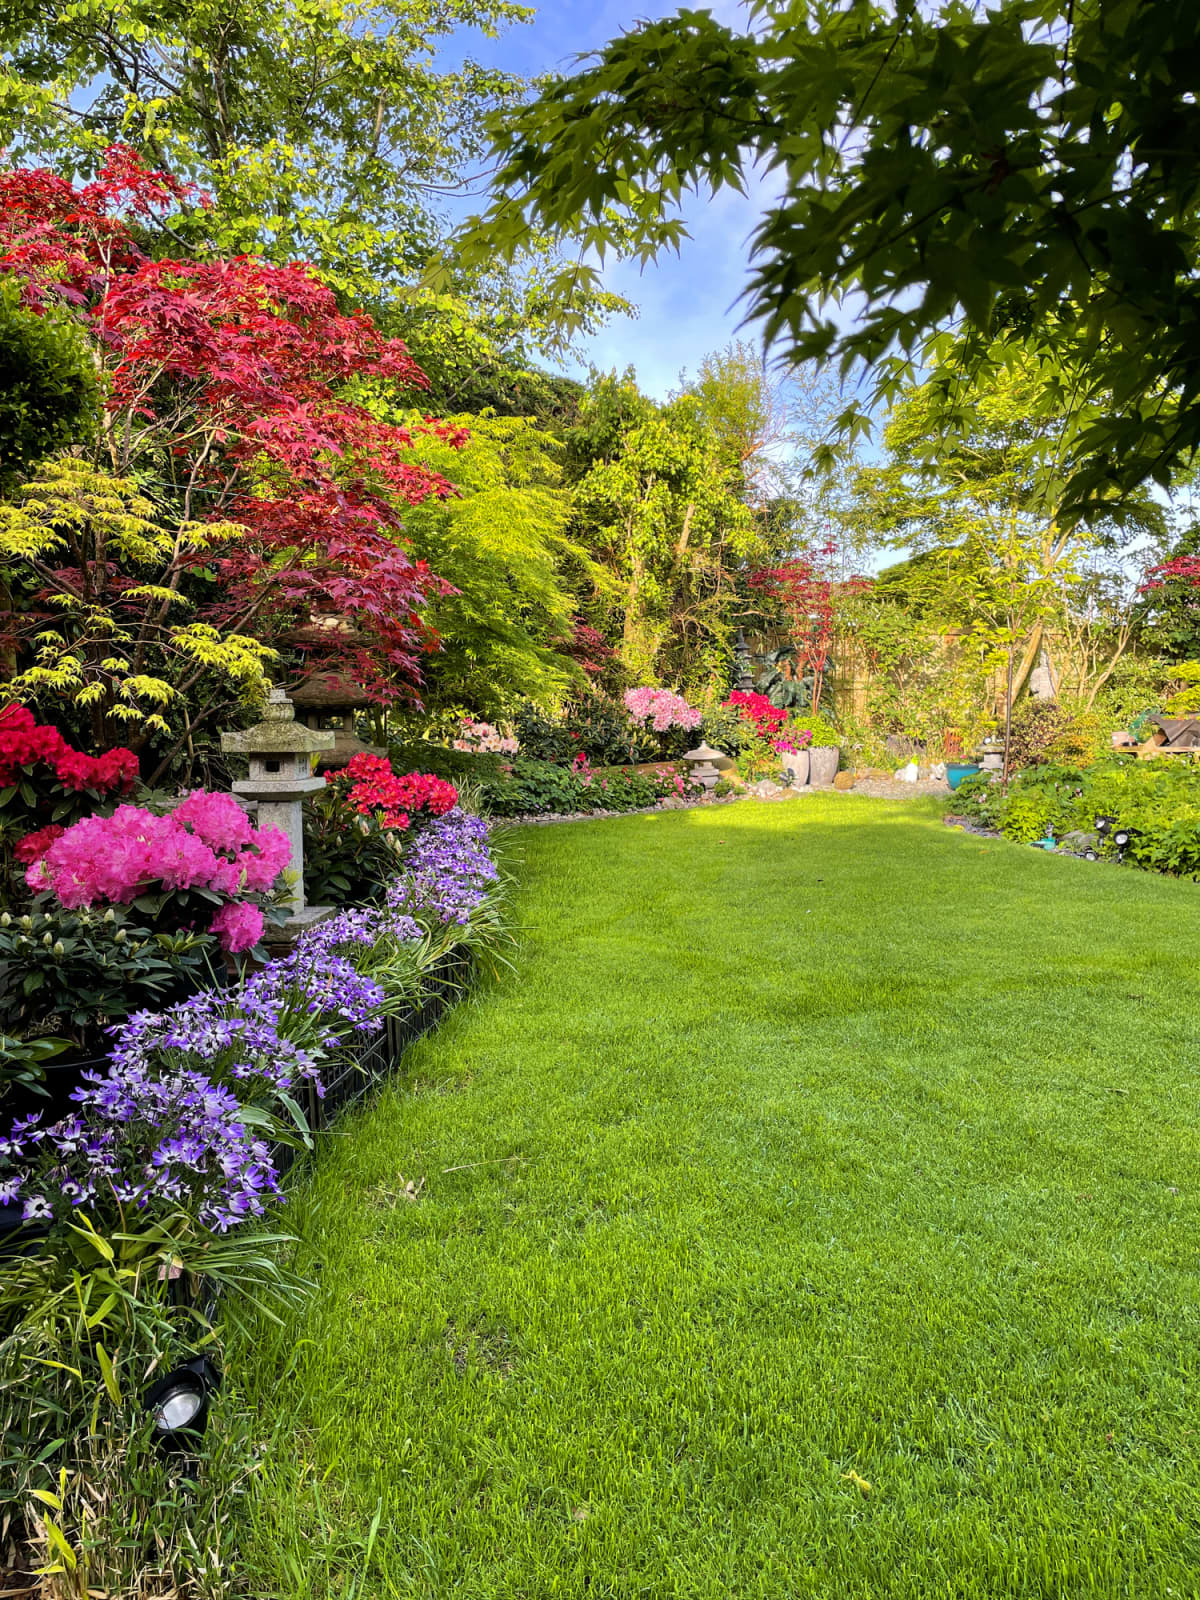 Beautiful lawn with flowers and fresh green grass